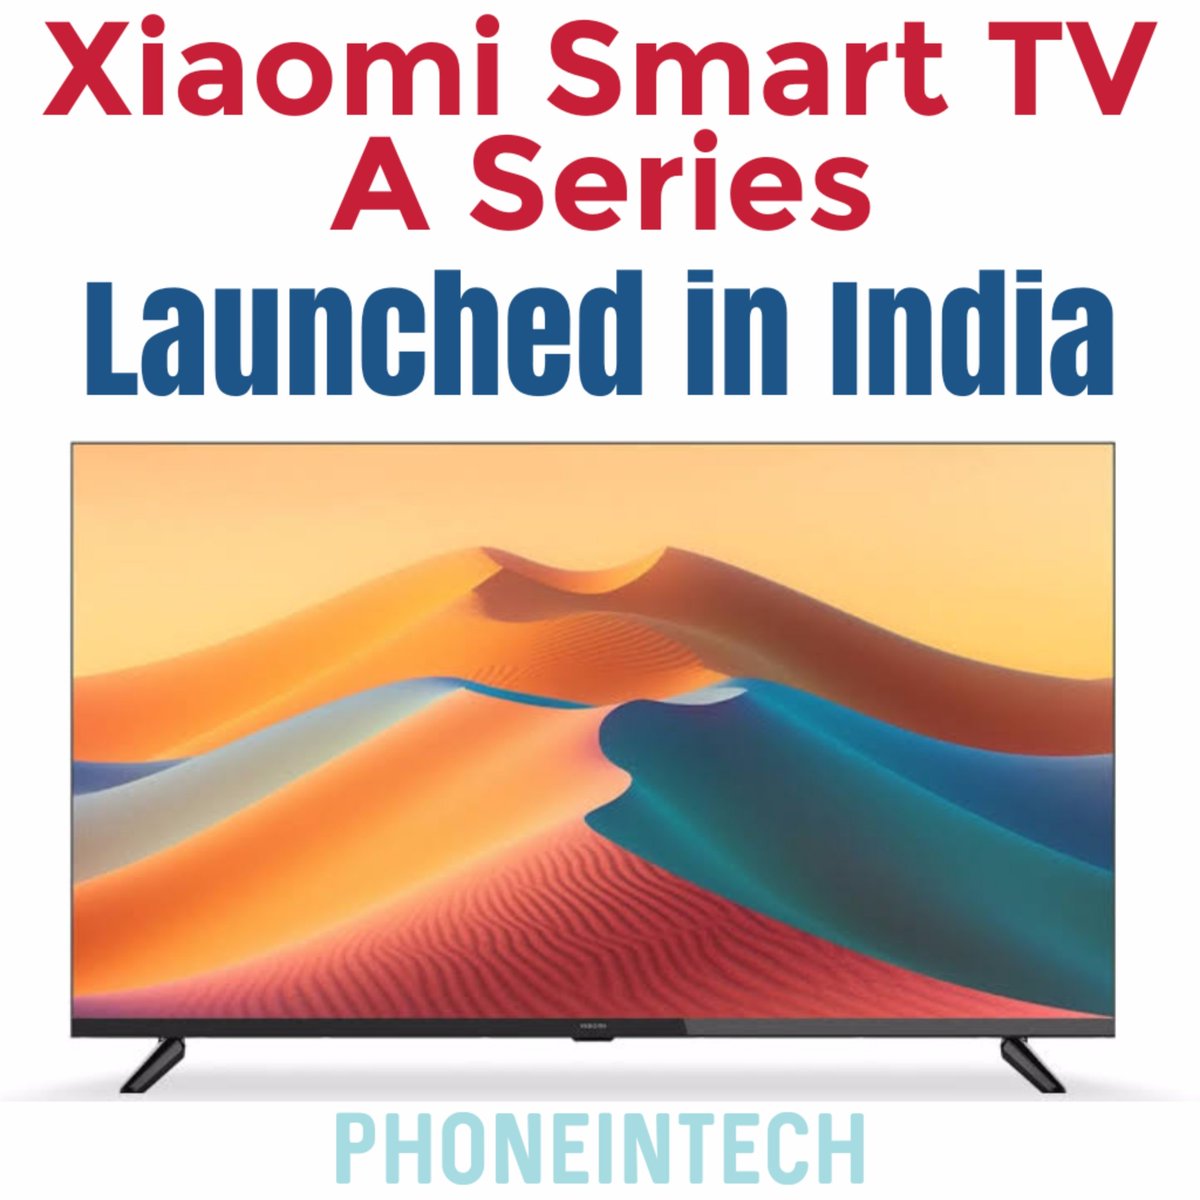 Xiaomi Smart TV A Series launched today in India. This includes the 32 inch, 40 inch and 43 inch Smart TVs. The pricing starts at ₹13,999.

#xiaomi #smarttv #xiaomismarttv #technewsindia #technews